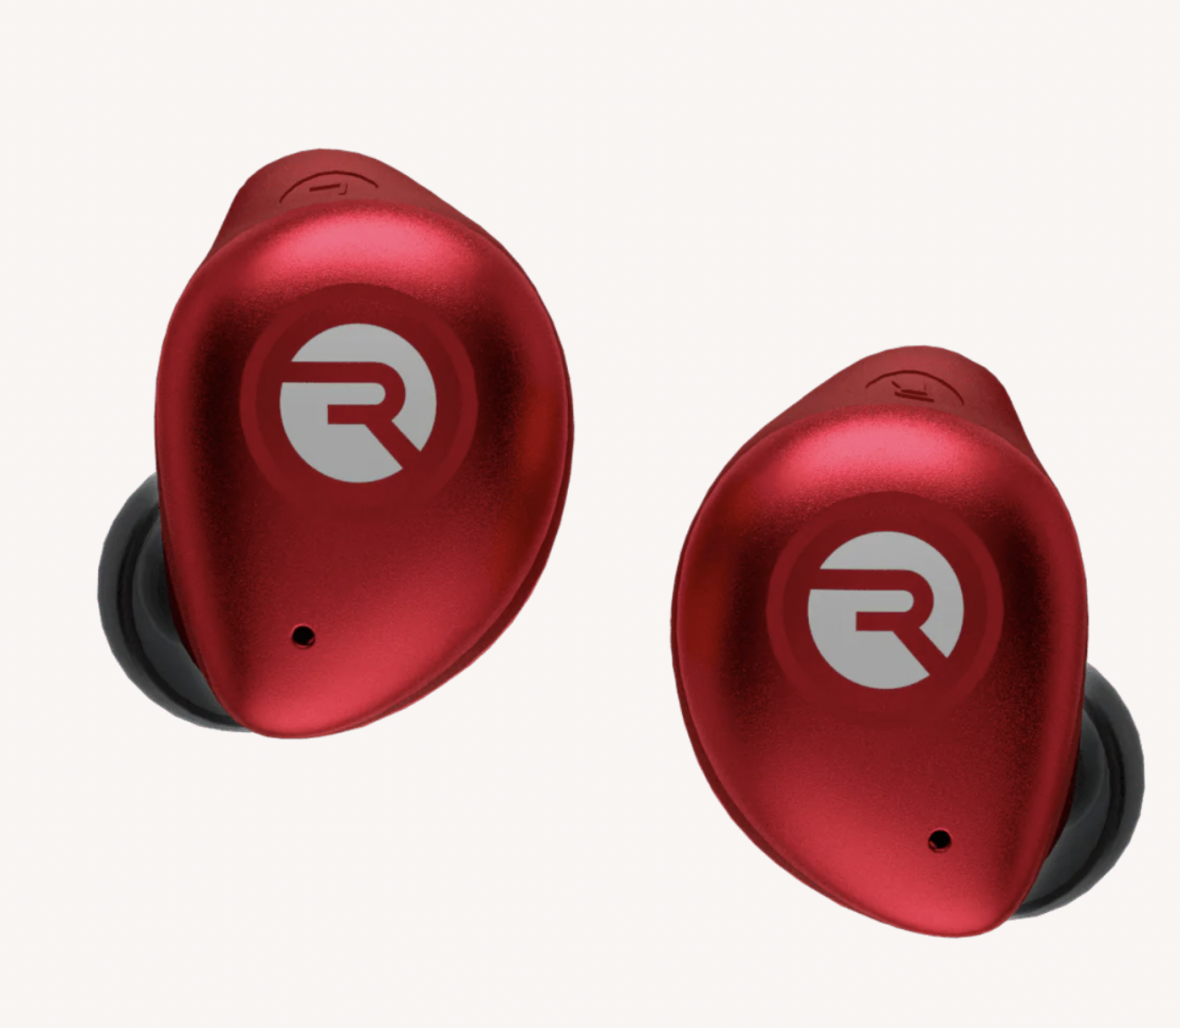 Raycon earbuds gift guide 2022 theGrio.com